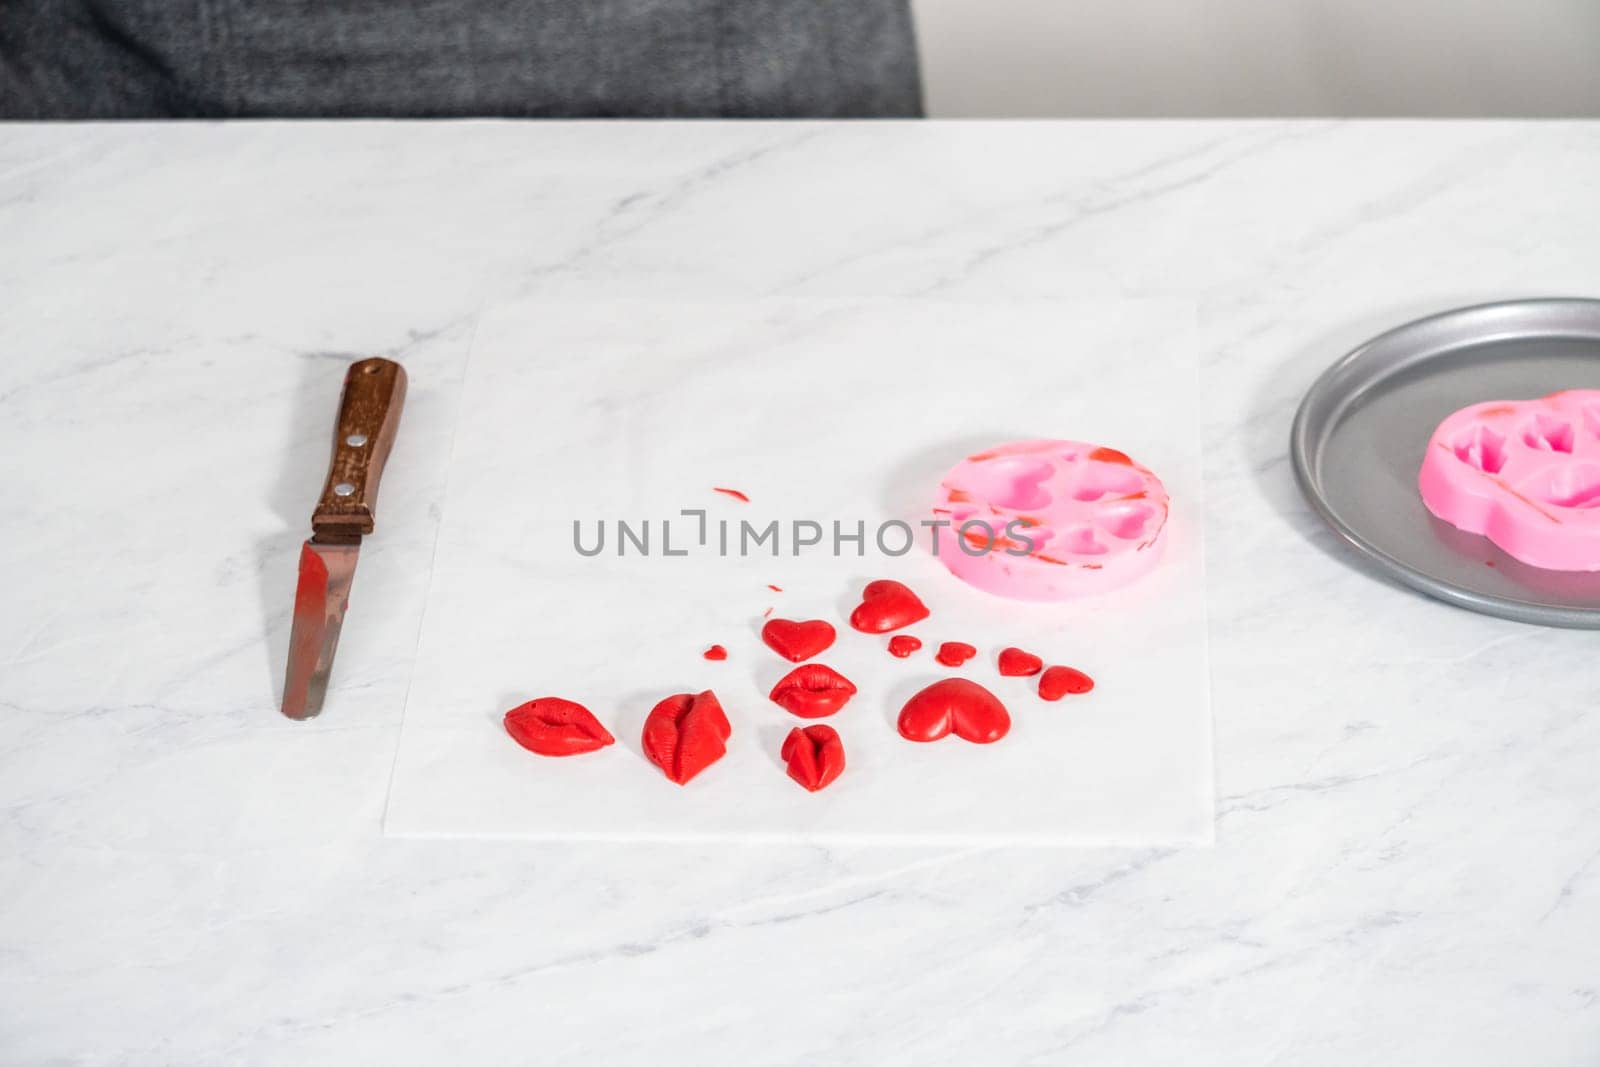 Dusting chocolate lips and heart-shaped chocolates with editable glitter for Valentine's Day.